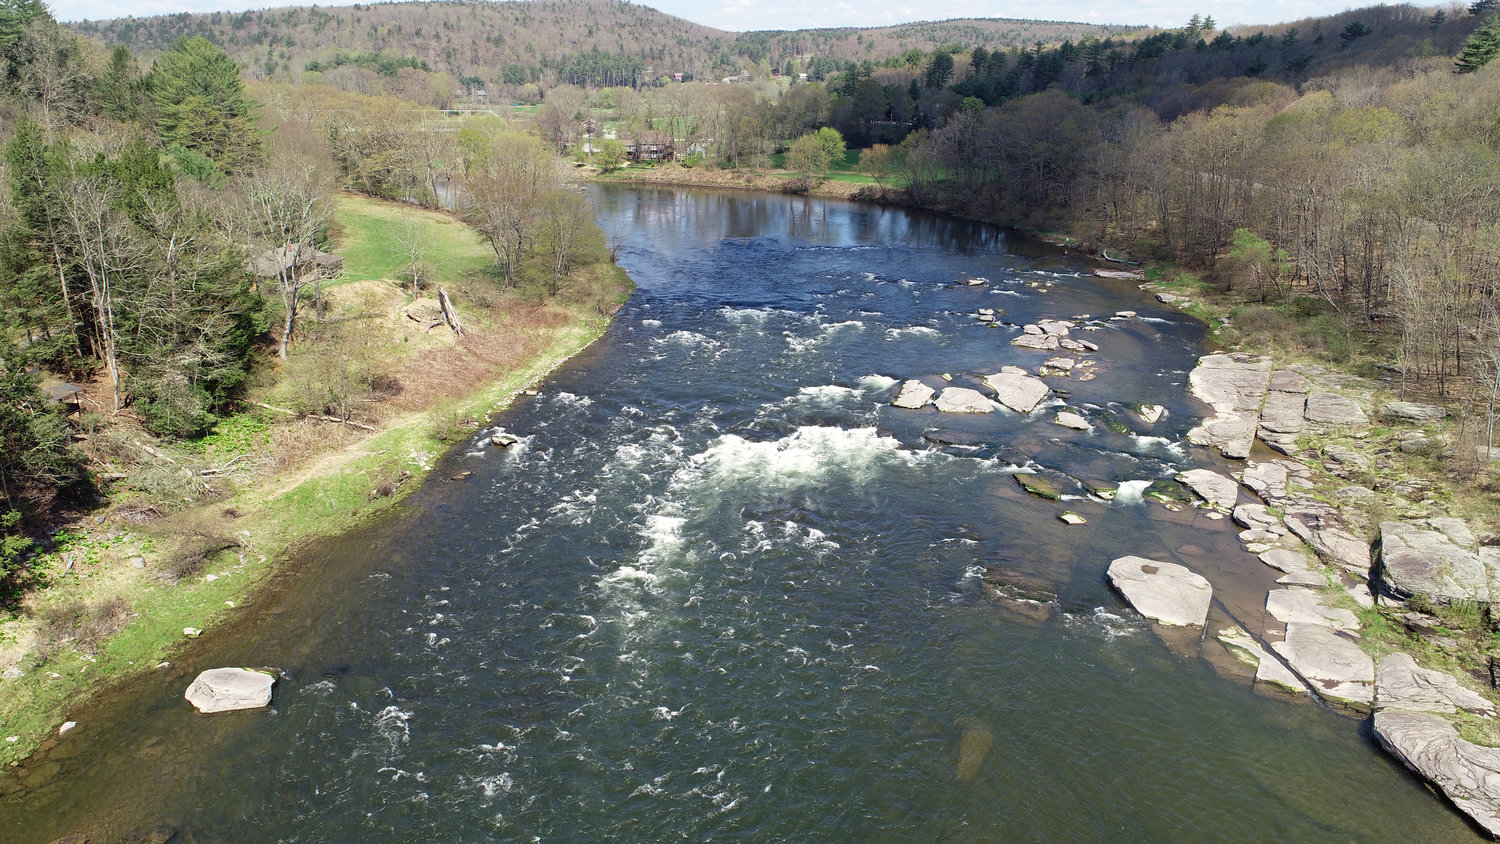 This is Skinners Falls on the Delaware River. In the spring, fishing opportunities abound on the Delaware. The opening of the many canoe liveries in the area is still in question; check for developments as the time approaches. Also, medical facilities are going to be under enhanced pressure. Some gathering spots like Skinners Falls may have to be placed off-limits depending on future developments; stay safe and avoid crowds.